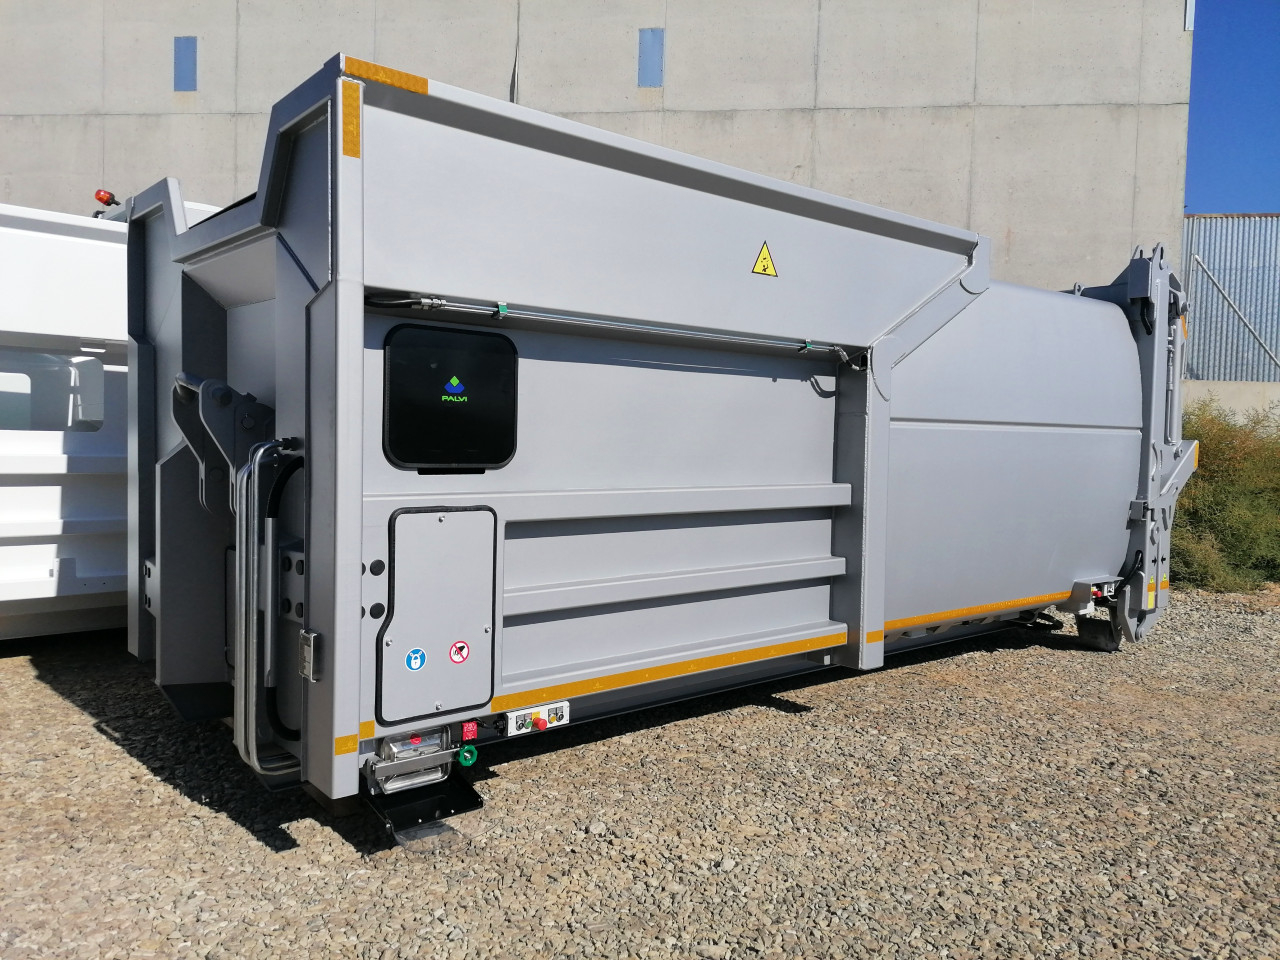 Perpignan bought a new mobile compactor